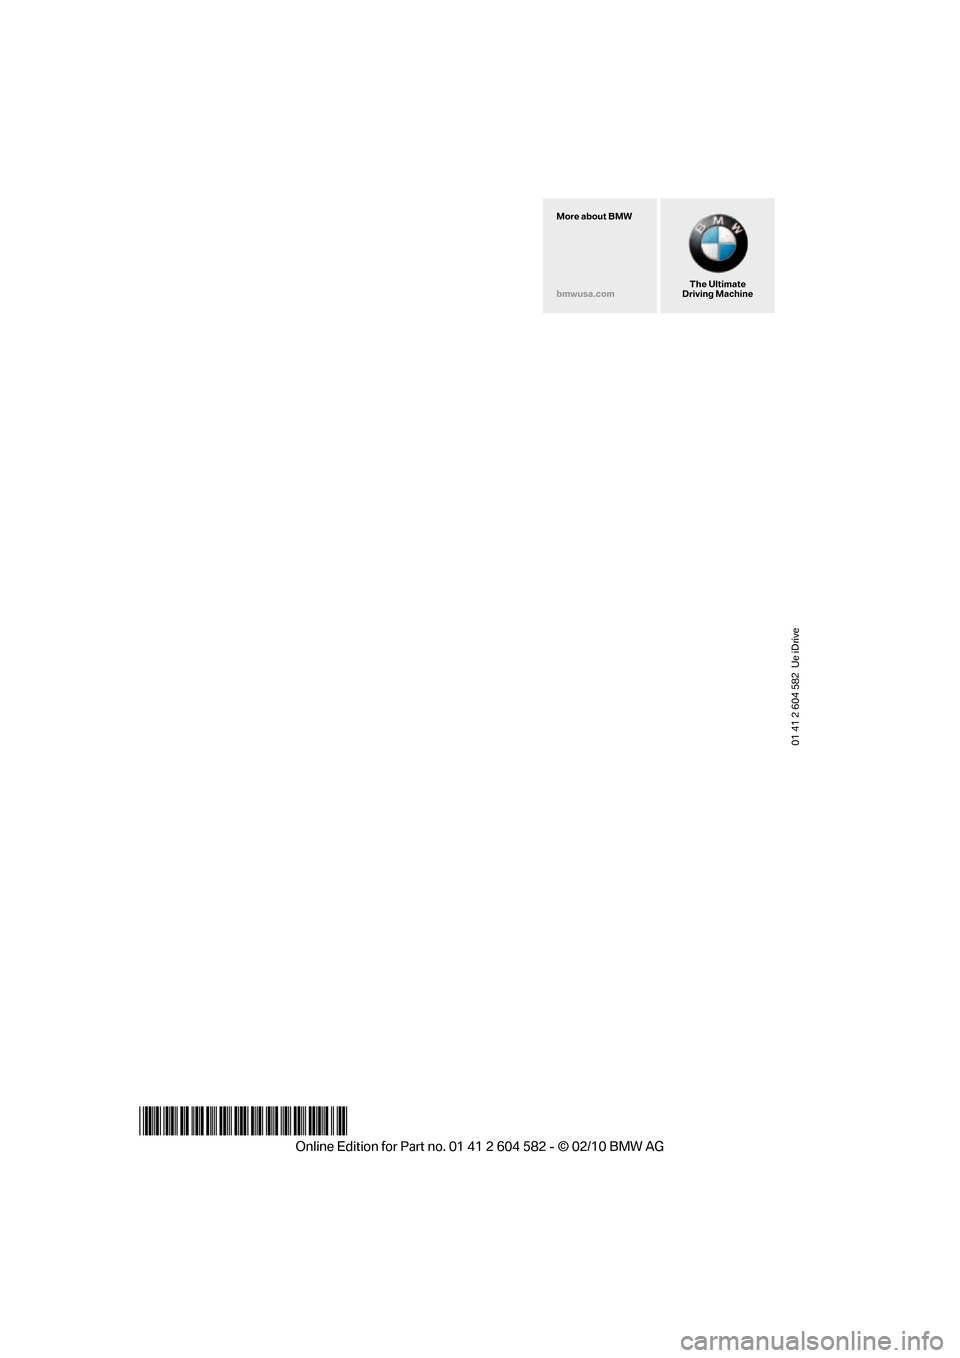 BMW 328I 2011 E90 Owners Manual 01 41 2 604 582  Ue iDrive
*BL260458200R*
The Ultimate
Driving Machine More about BMW
bmwusa.com 